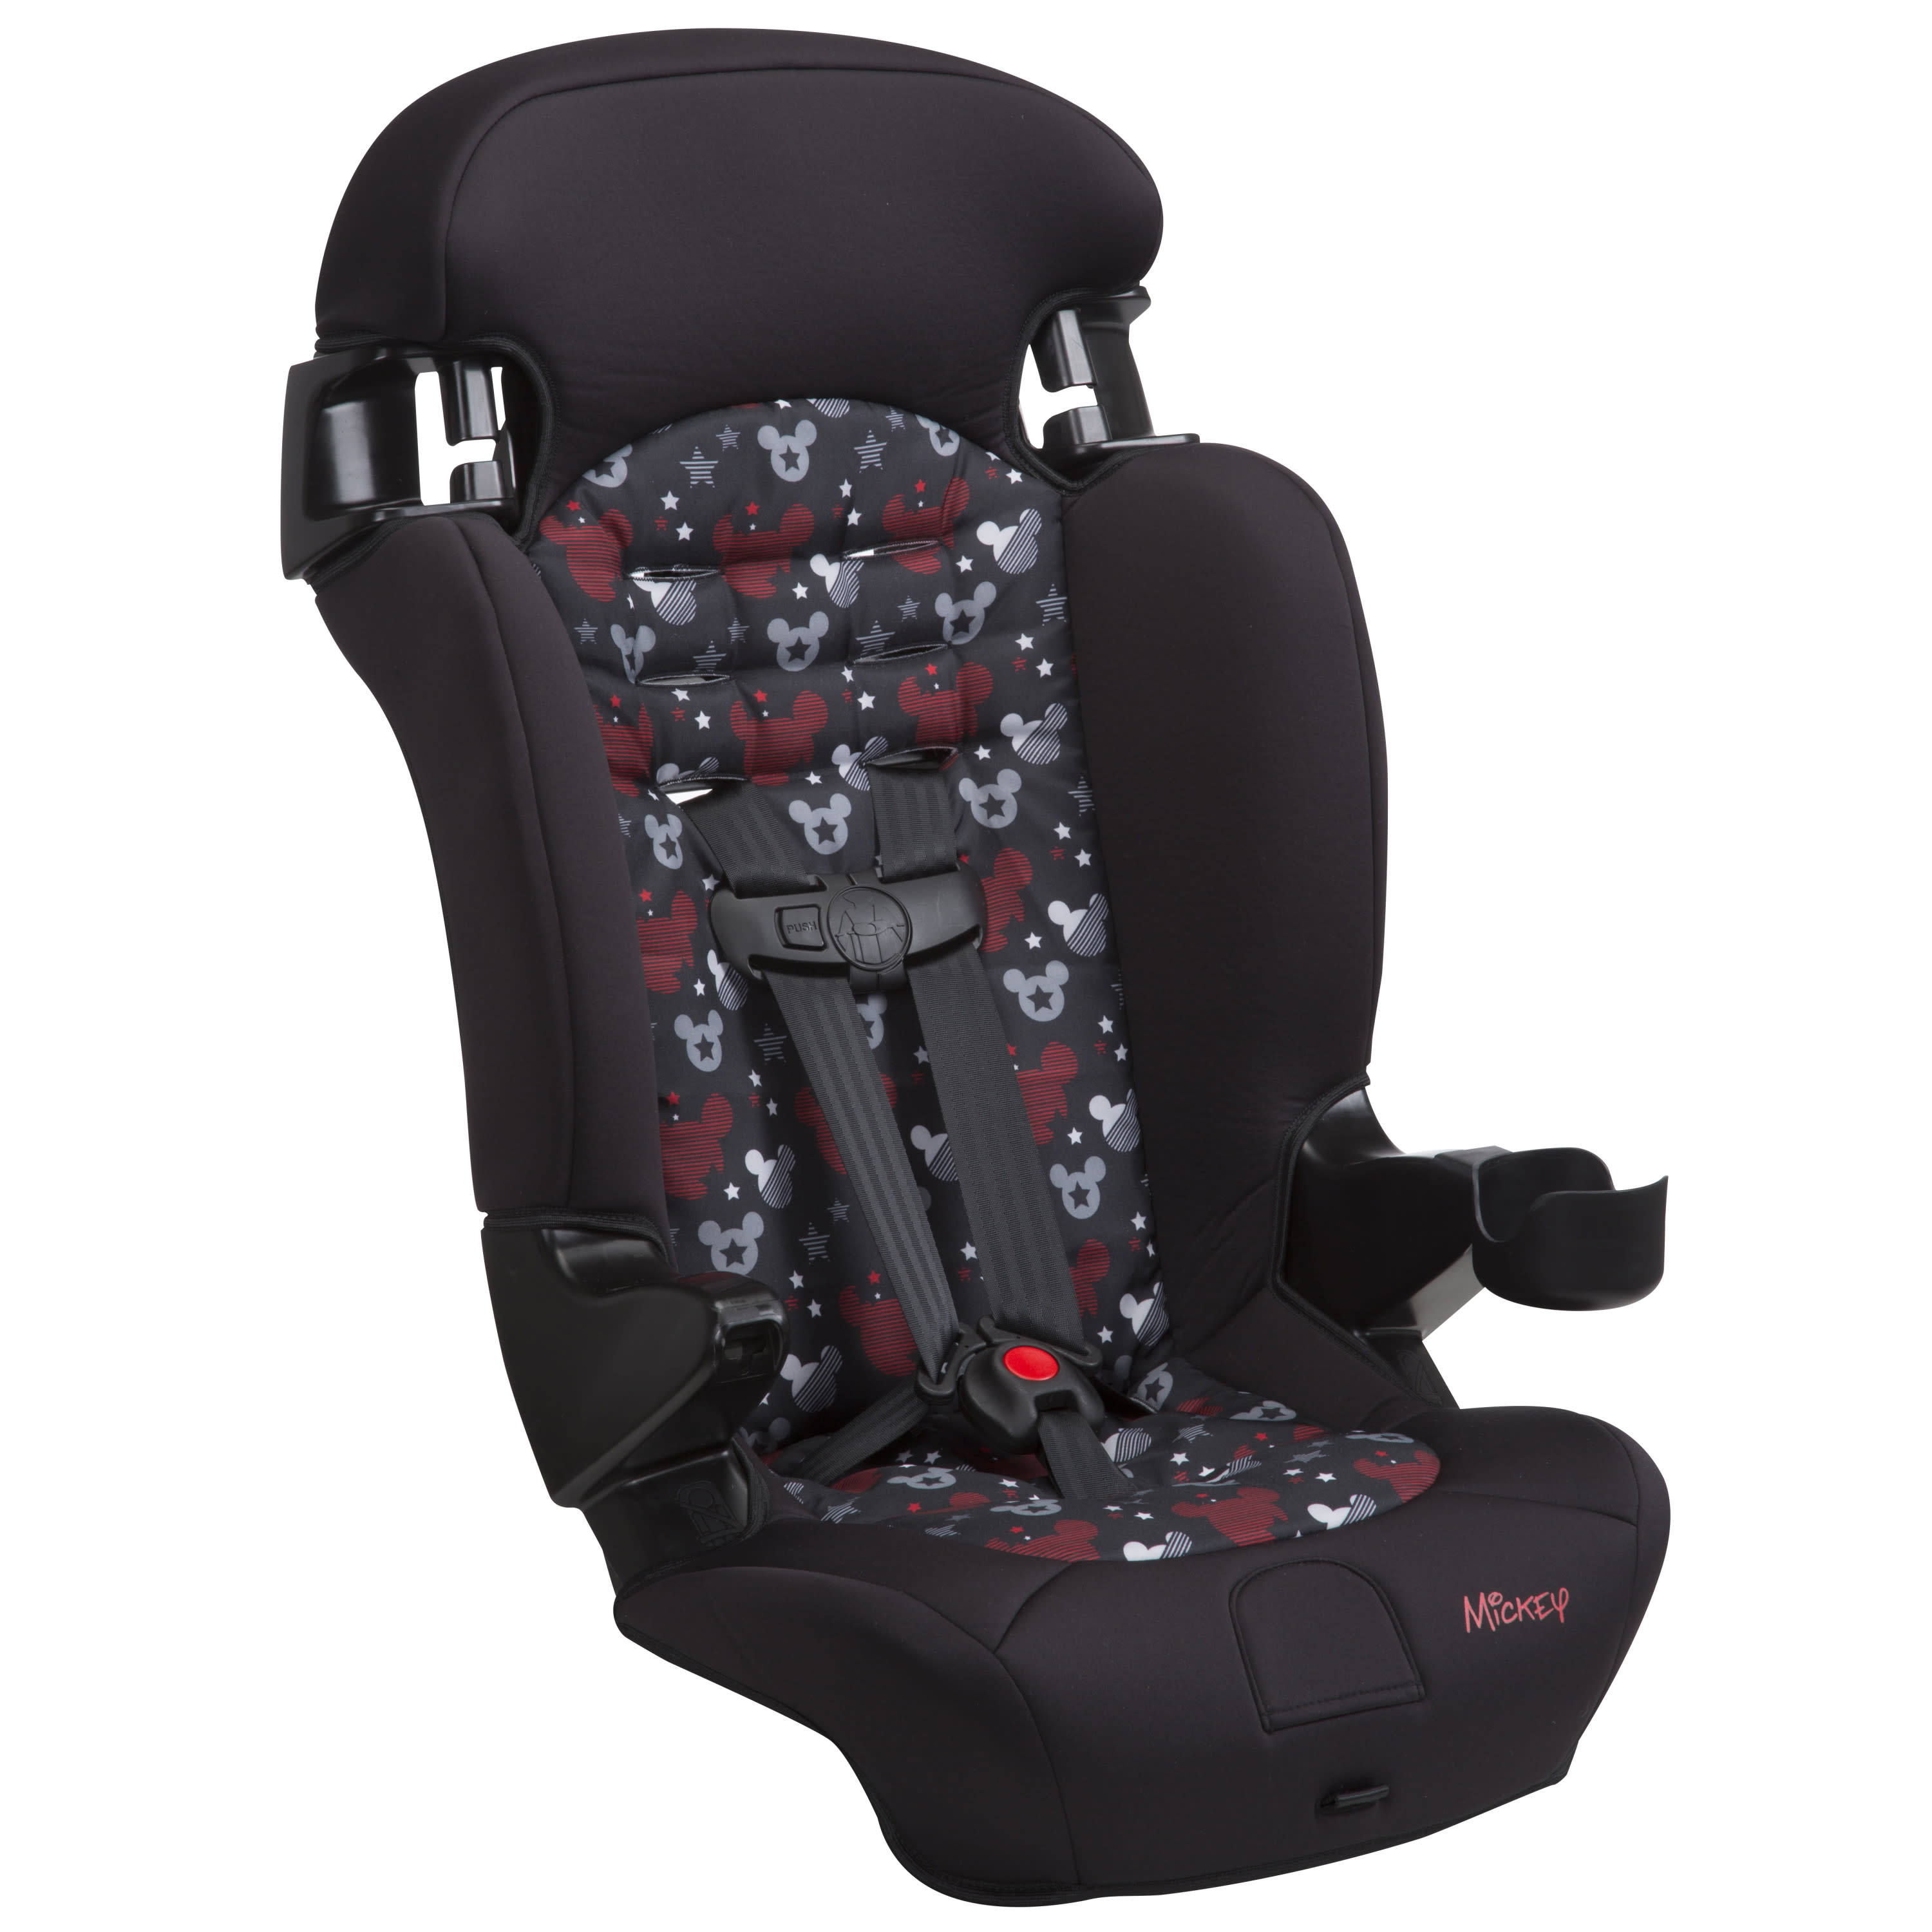 Disney Baby Finale 2-in-1 Booster Car Seat, Outta This World - image 5 of 14